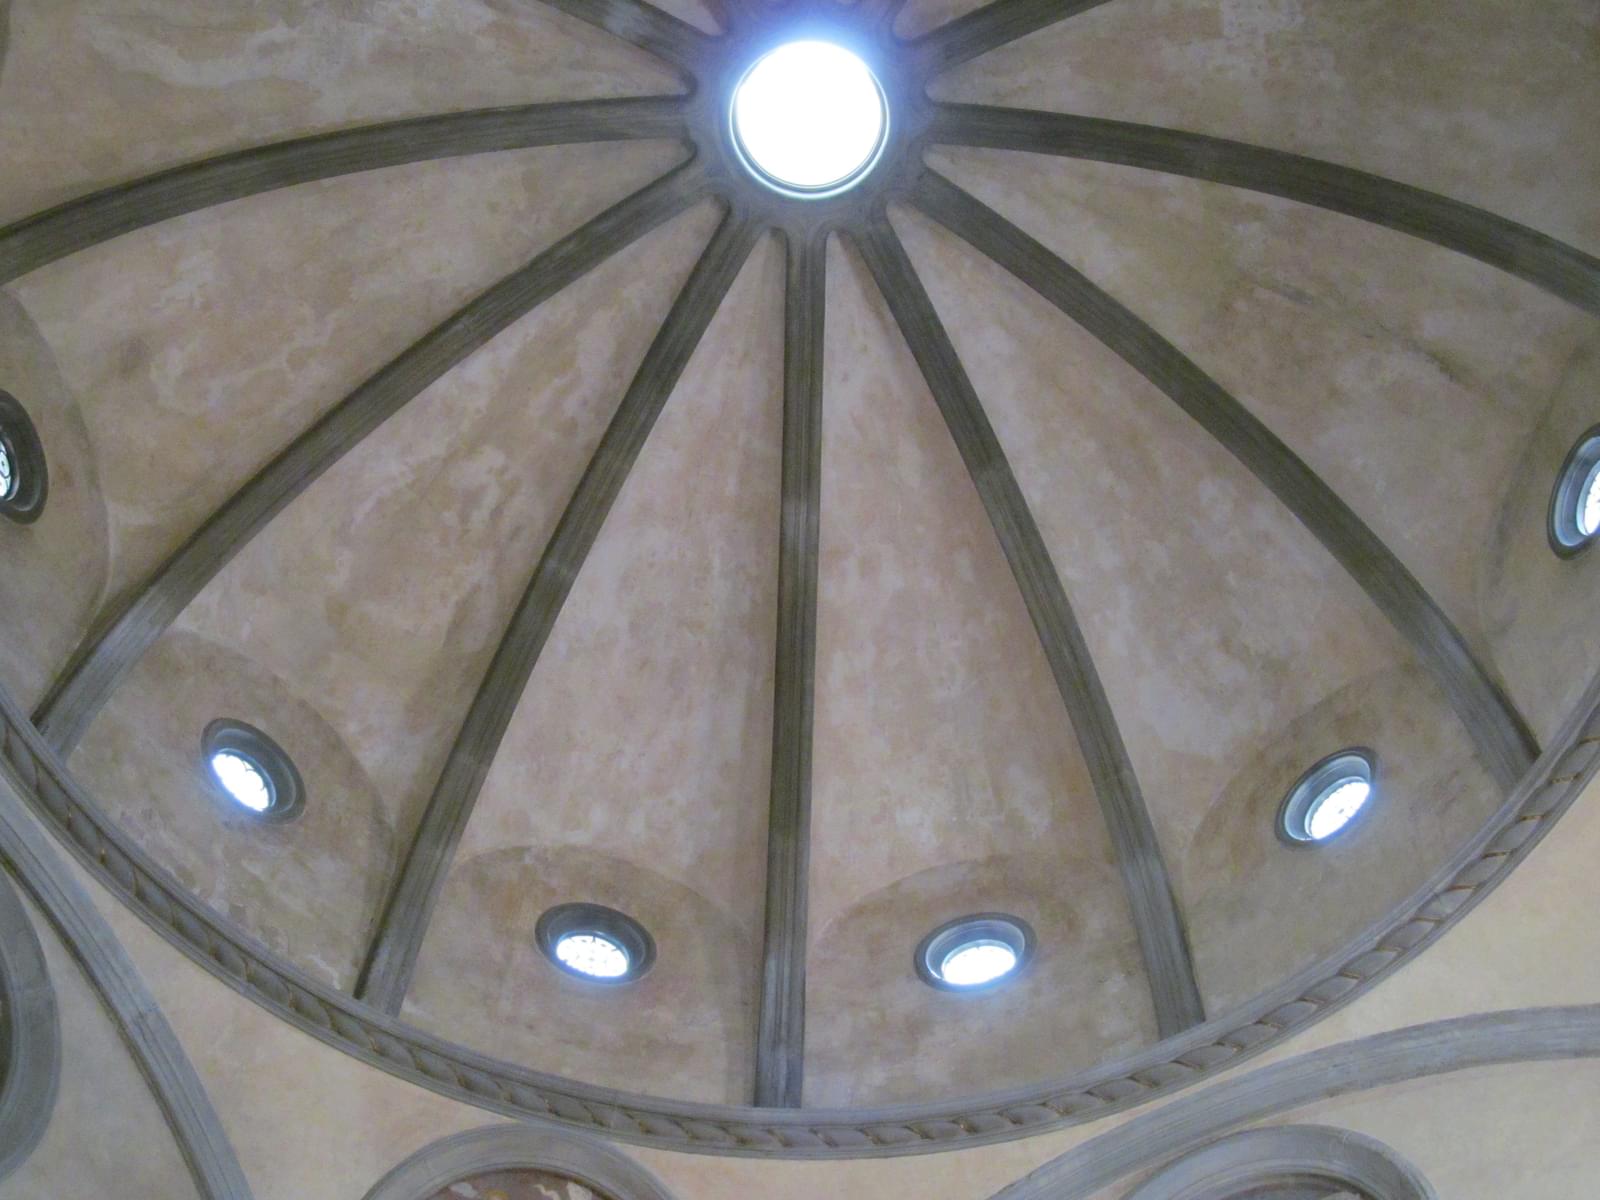 The Contest to Build a Dome Without Buttresses